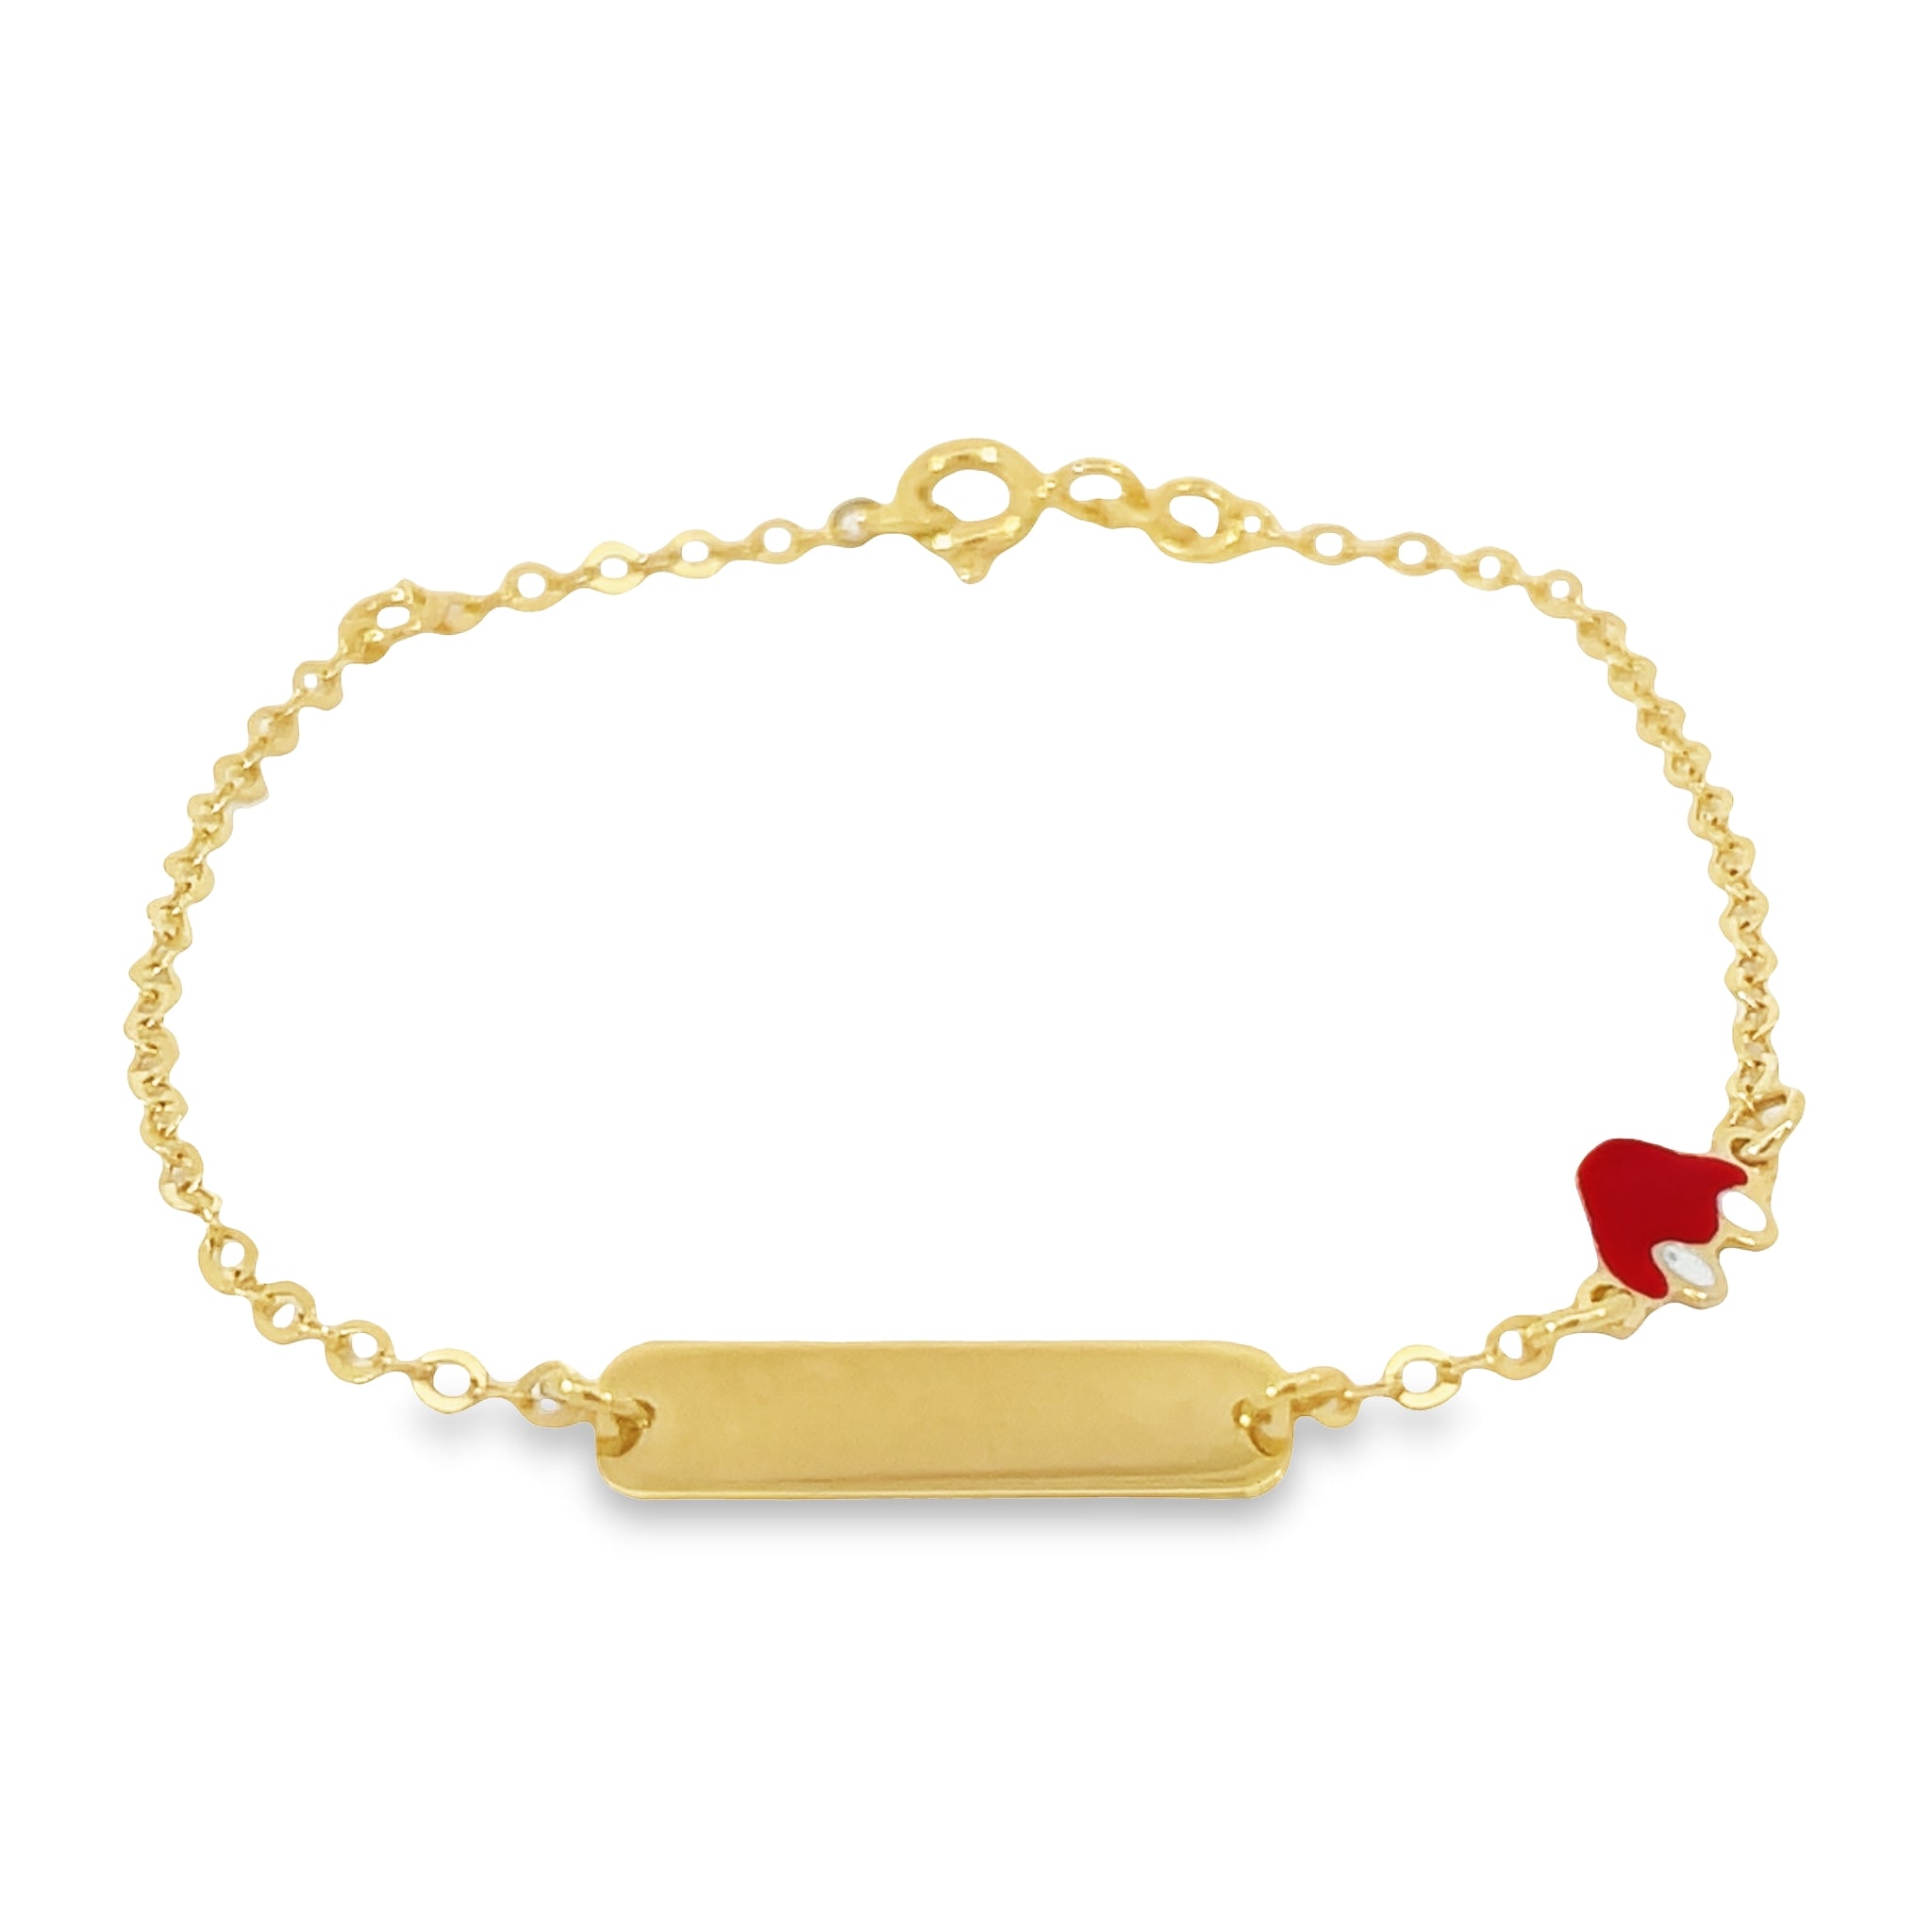 This ID bracelet sparkles with a 14k Italian yellow gold chain, featuring a sophisticated red car charm. Add a touch of sparkle to any child's look with this delicate and stylish 6.5" long bracelet. Show your child how much they mean to you with this timeless and chic accessory.